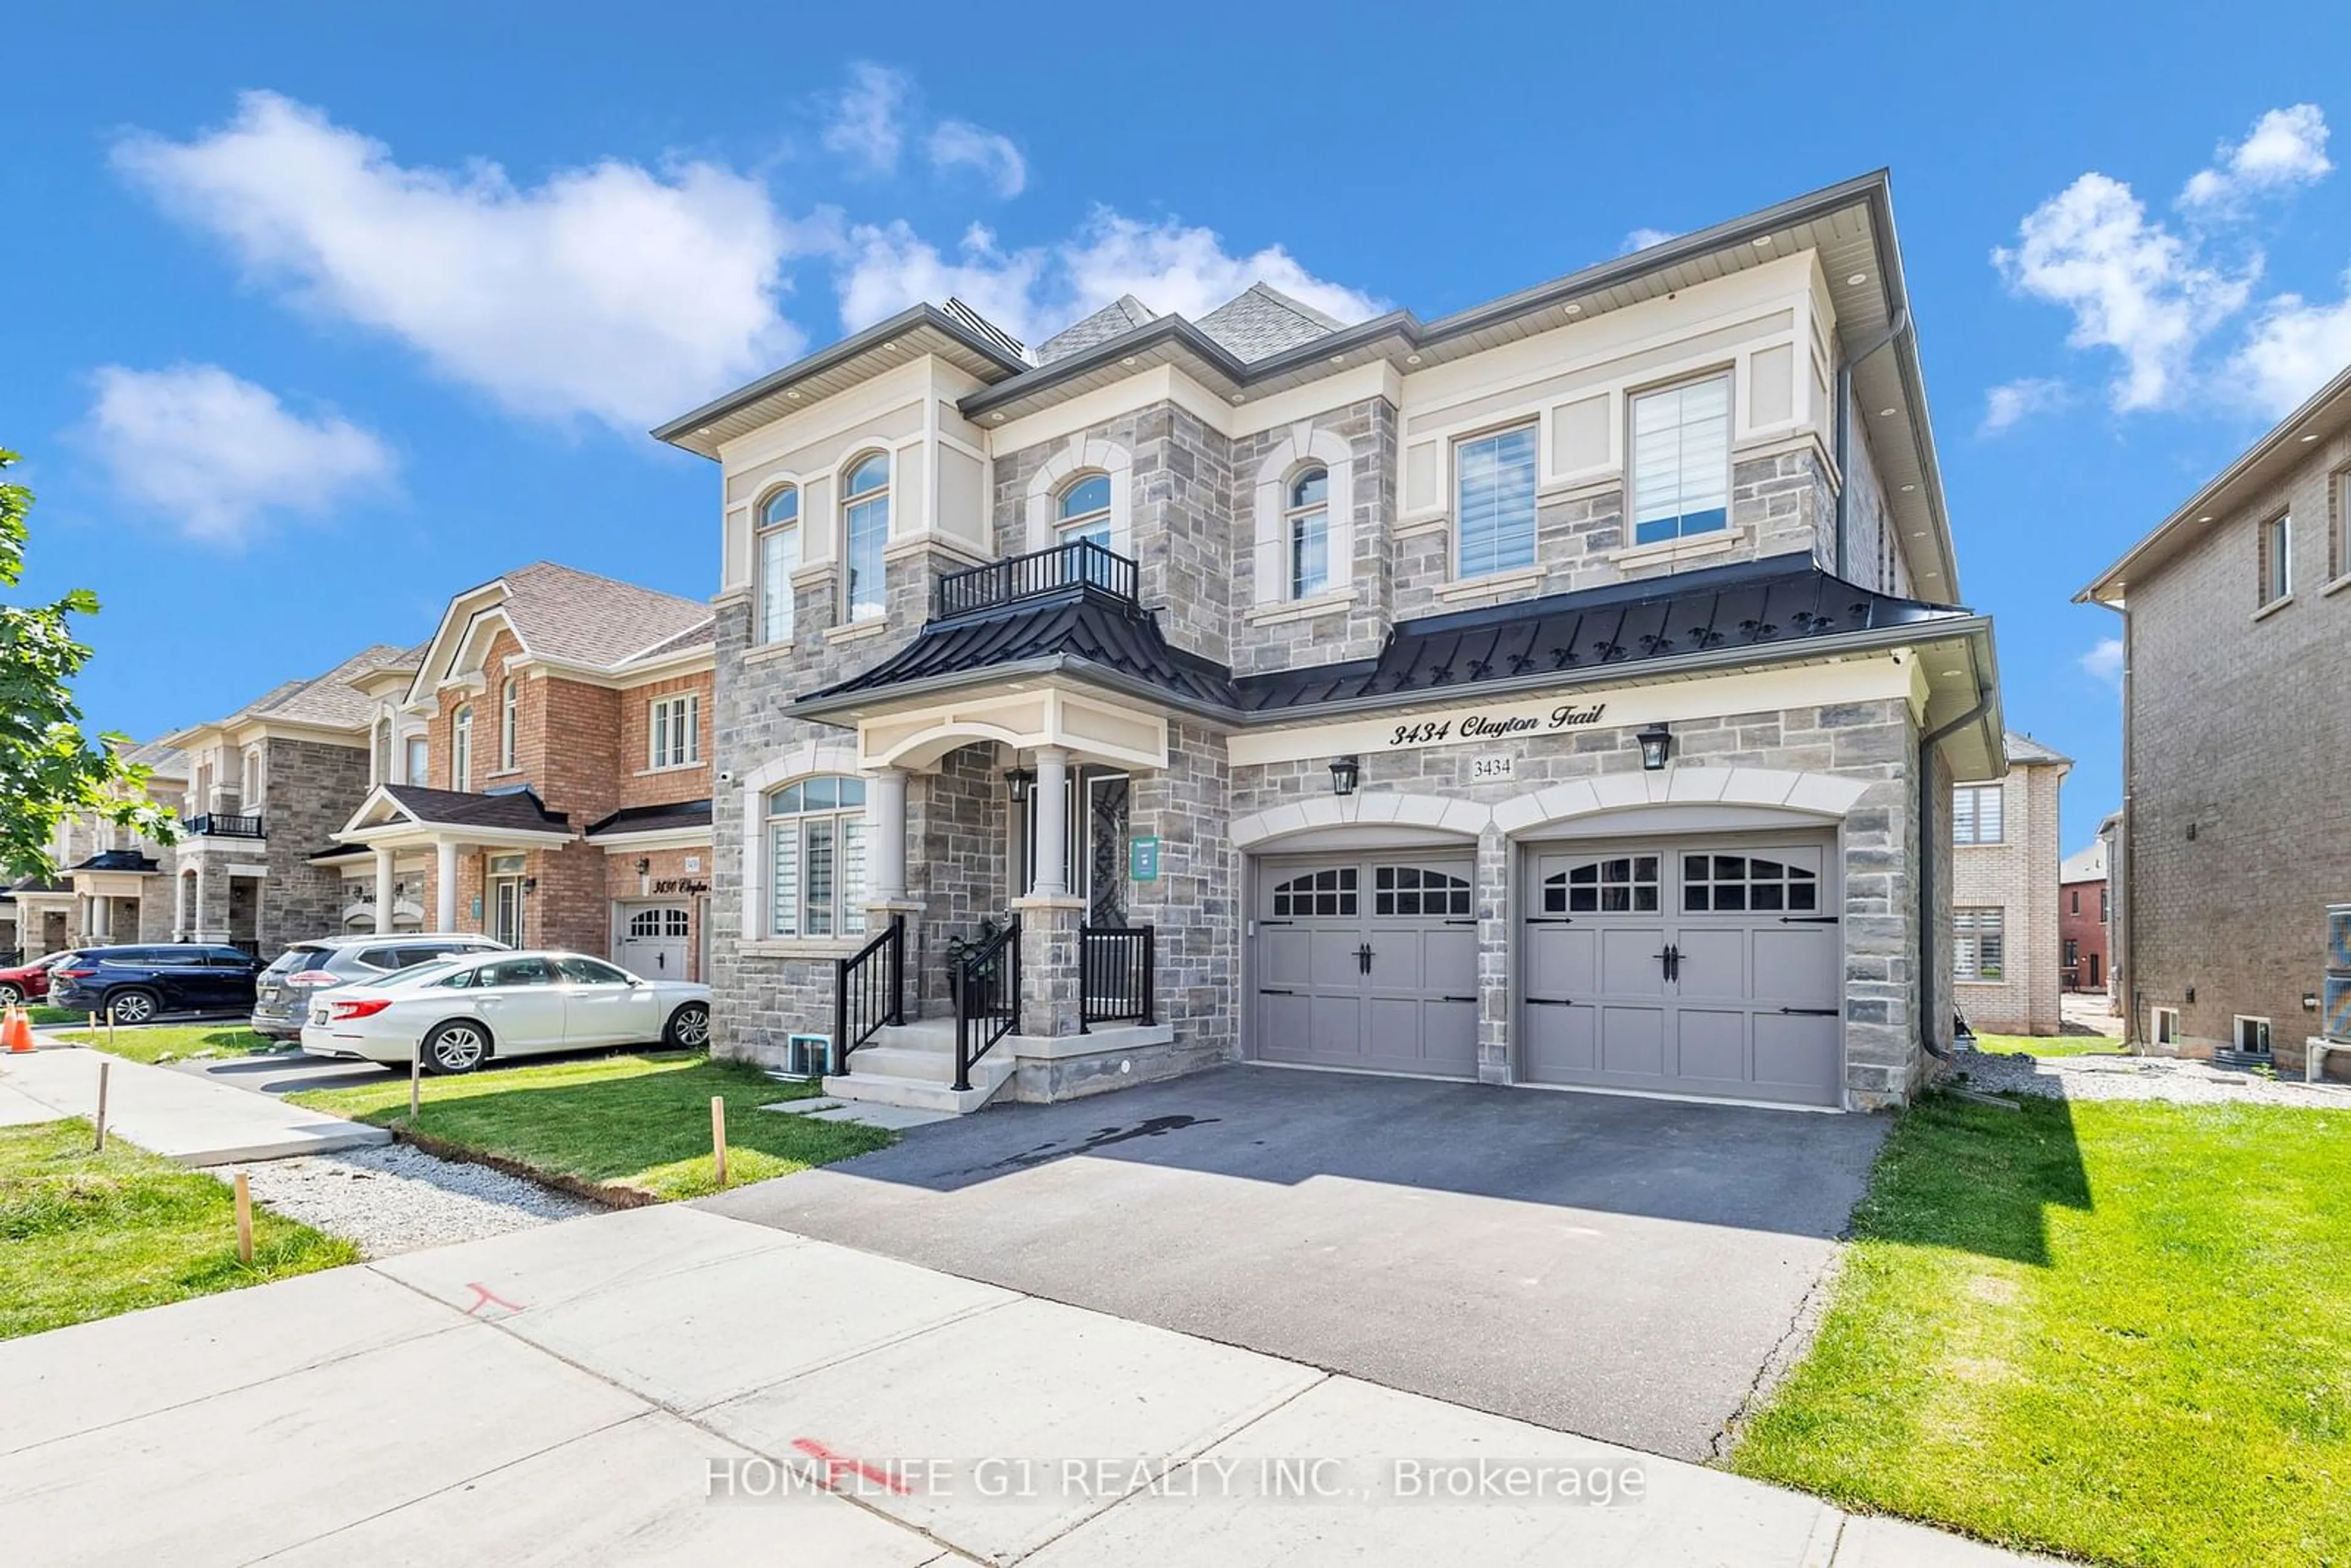 Home with brick exterior material for 3434 Clayton Tr, Oakville Ontario L6H 7C6